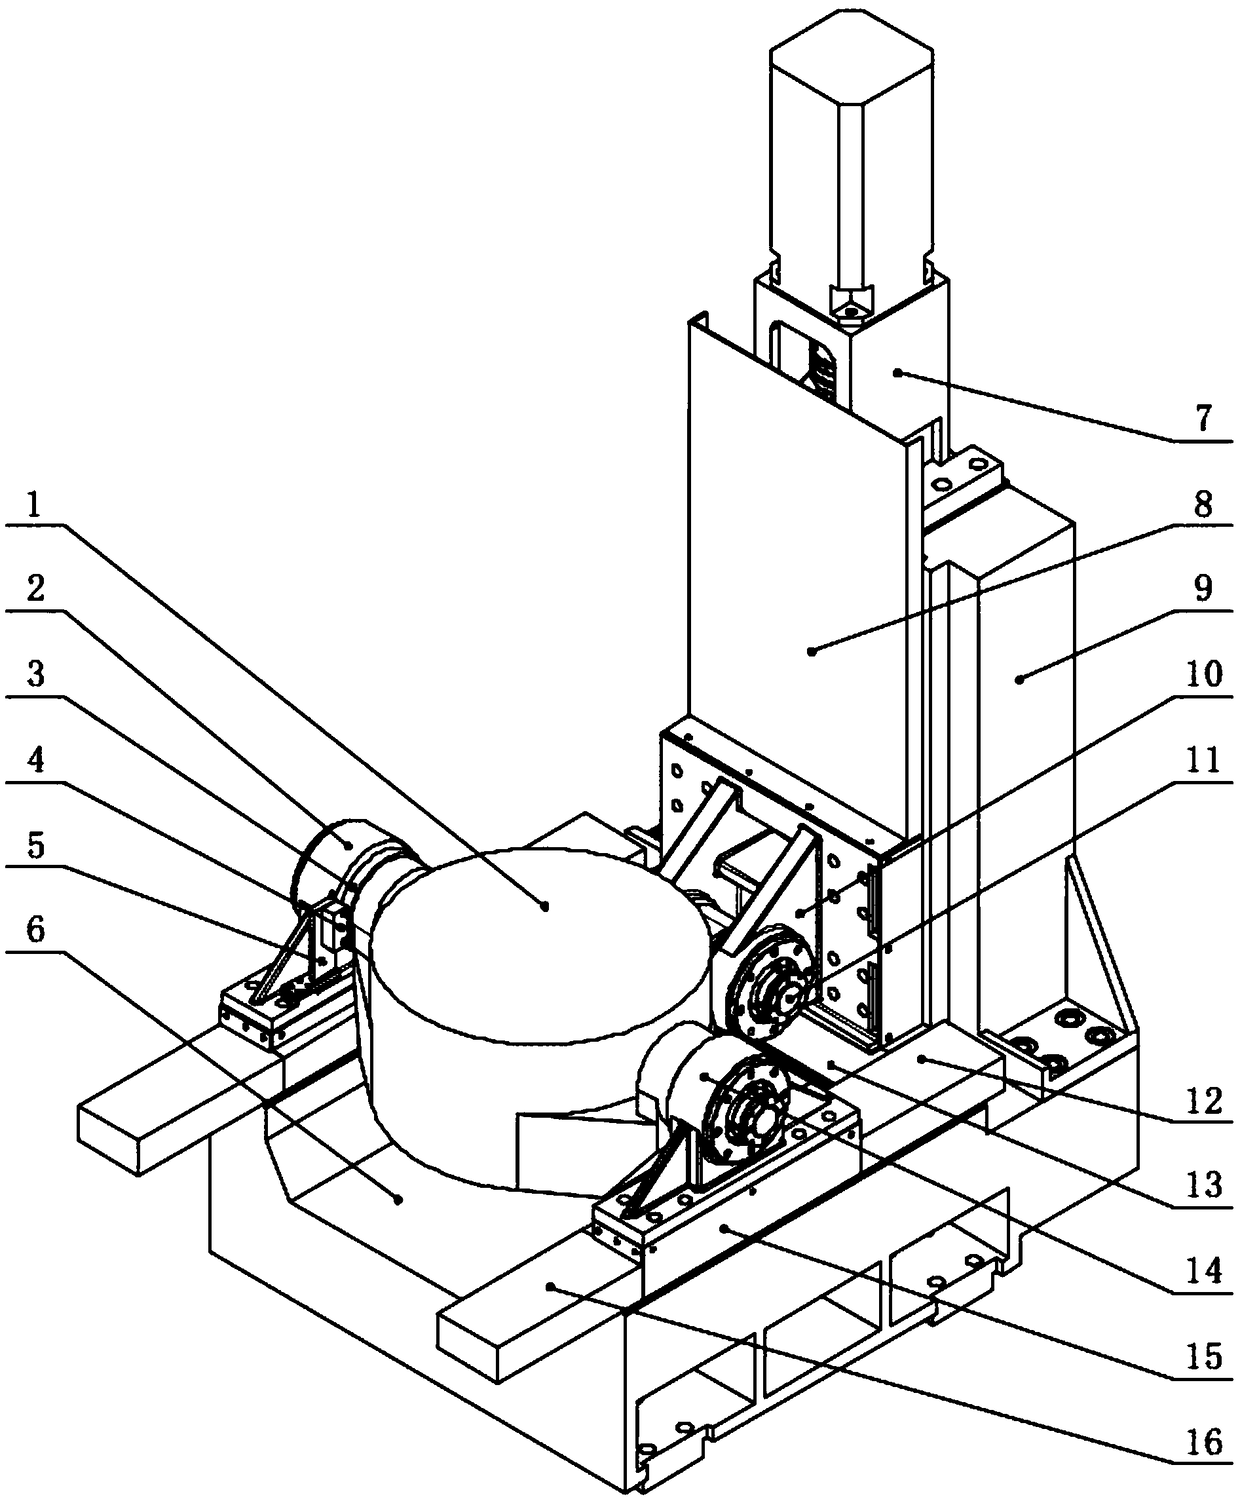 Cradle rotary table dragged by ball screw